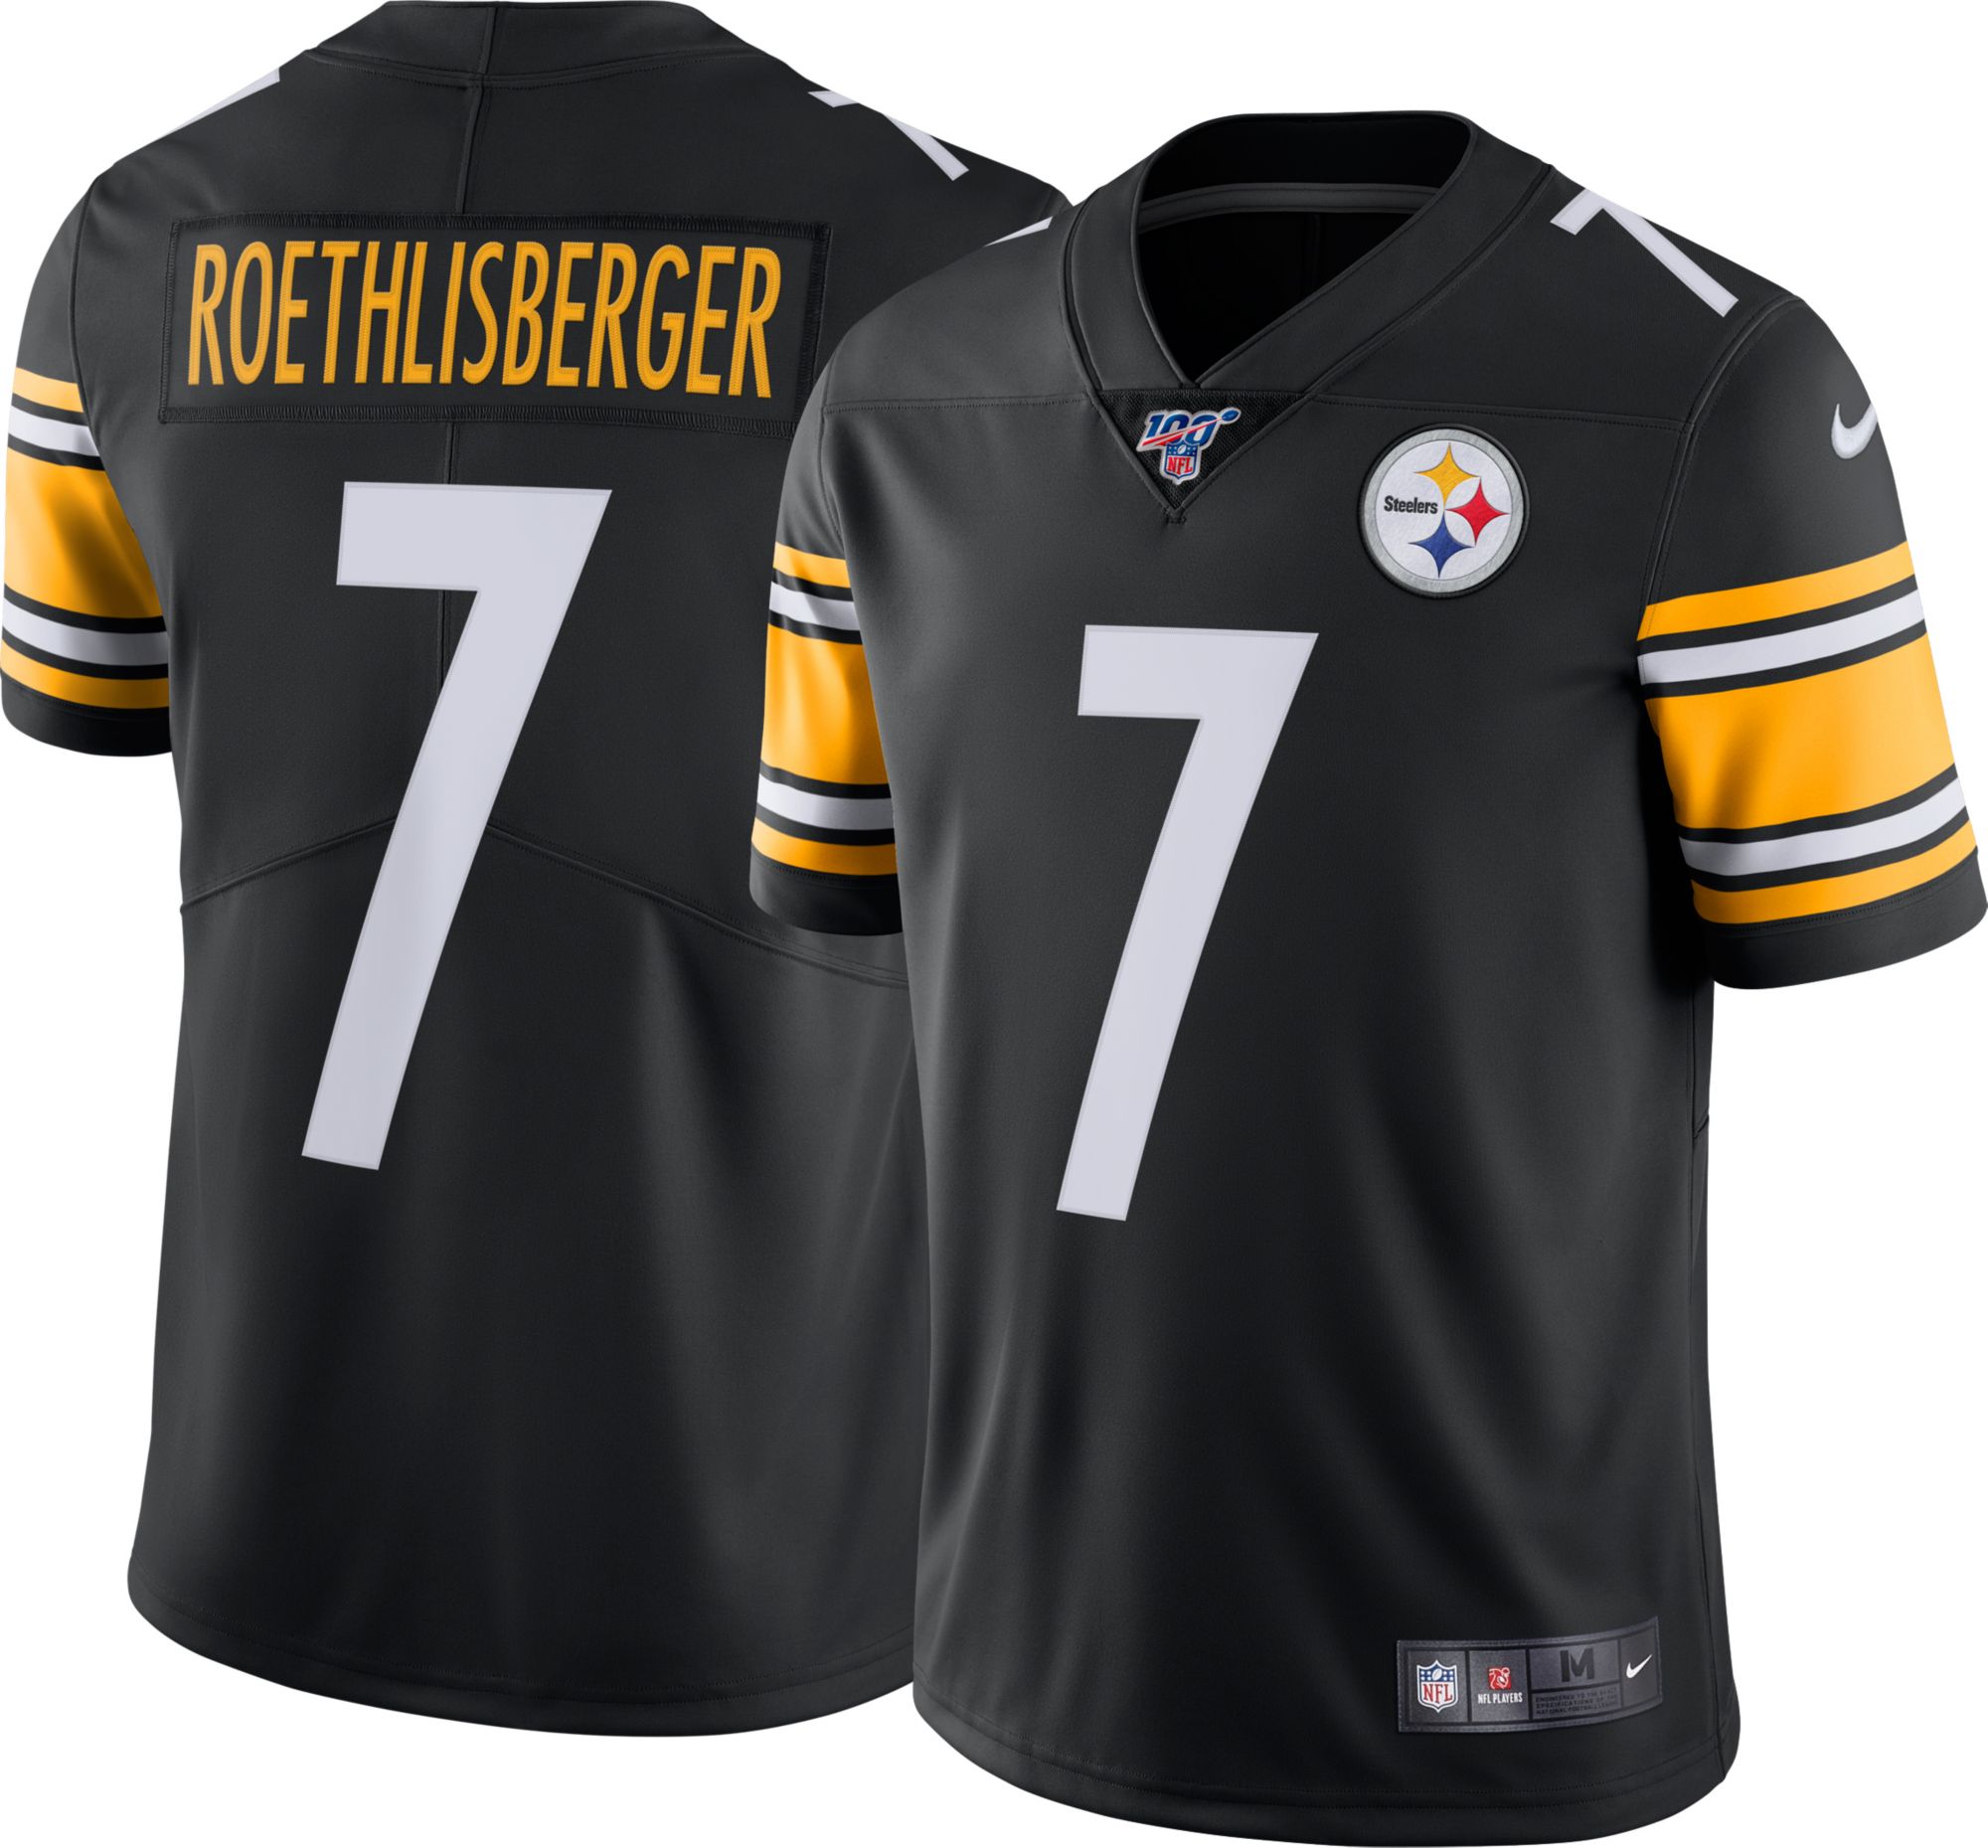 steelers jersey number 7